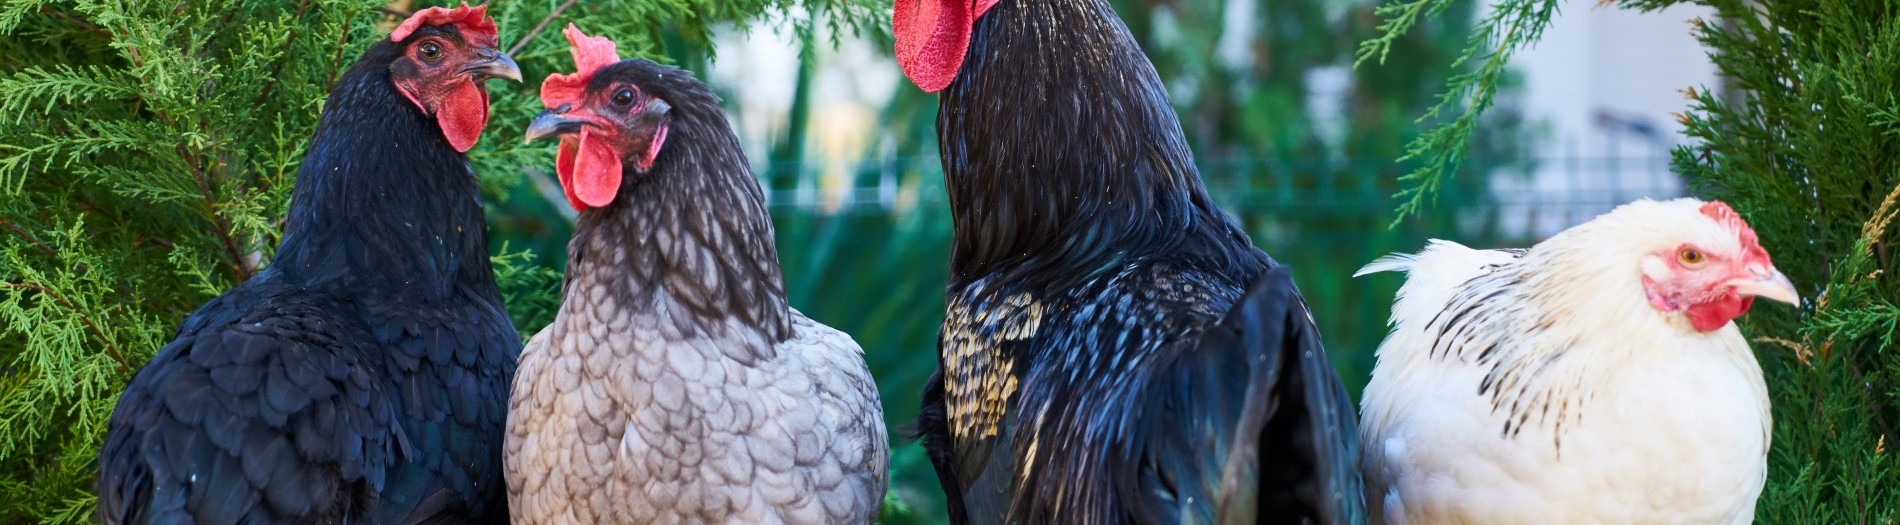 INNOPOULTRY. The poultry food chain: tackling old problems with innovative approaches